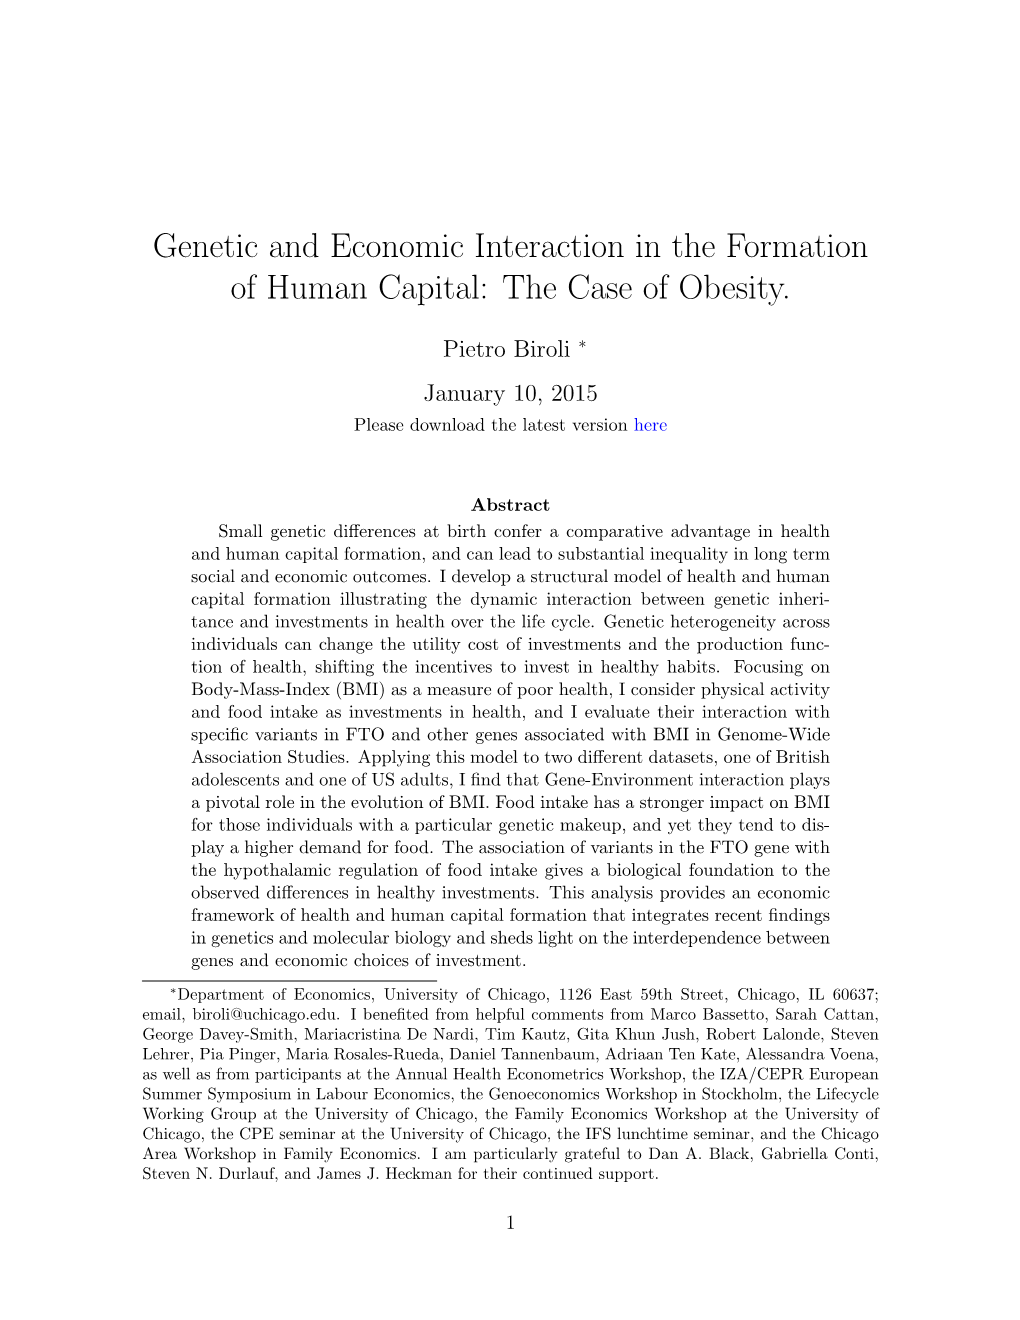 Genetic and Economic Interaction in the Formation of Human Capital: the Case of Obesity